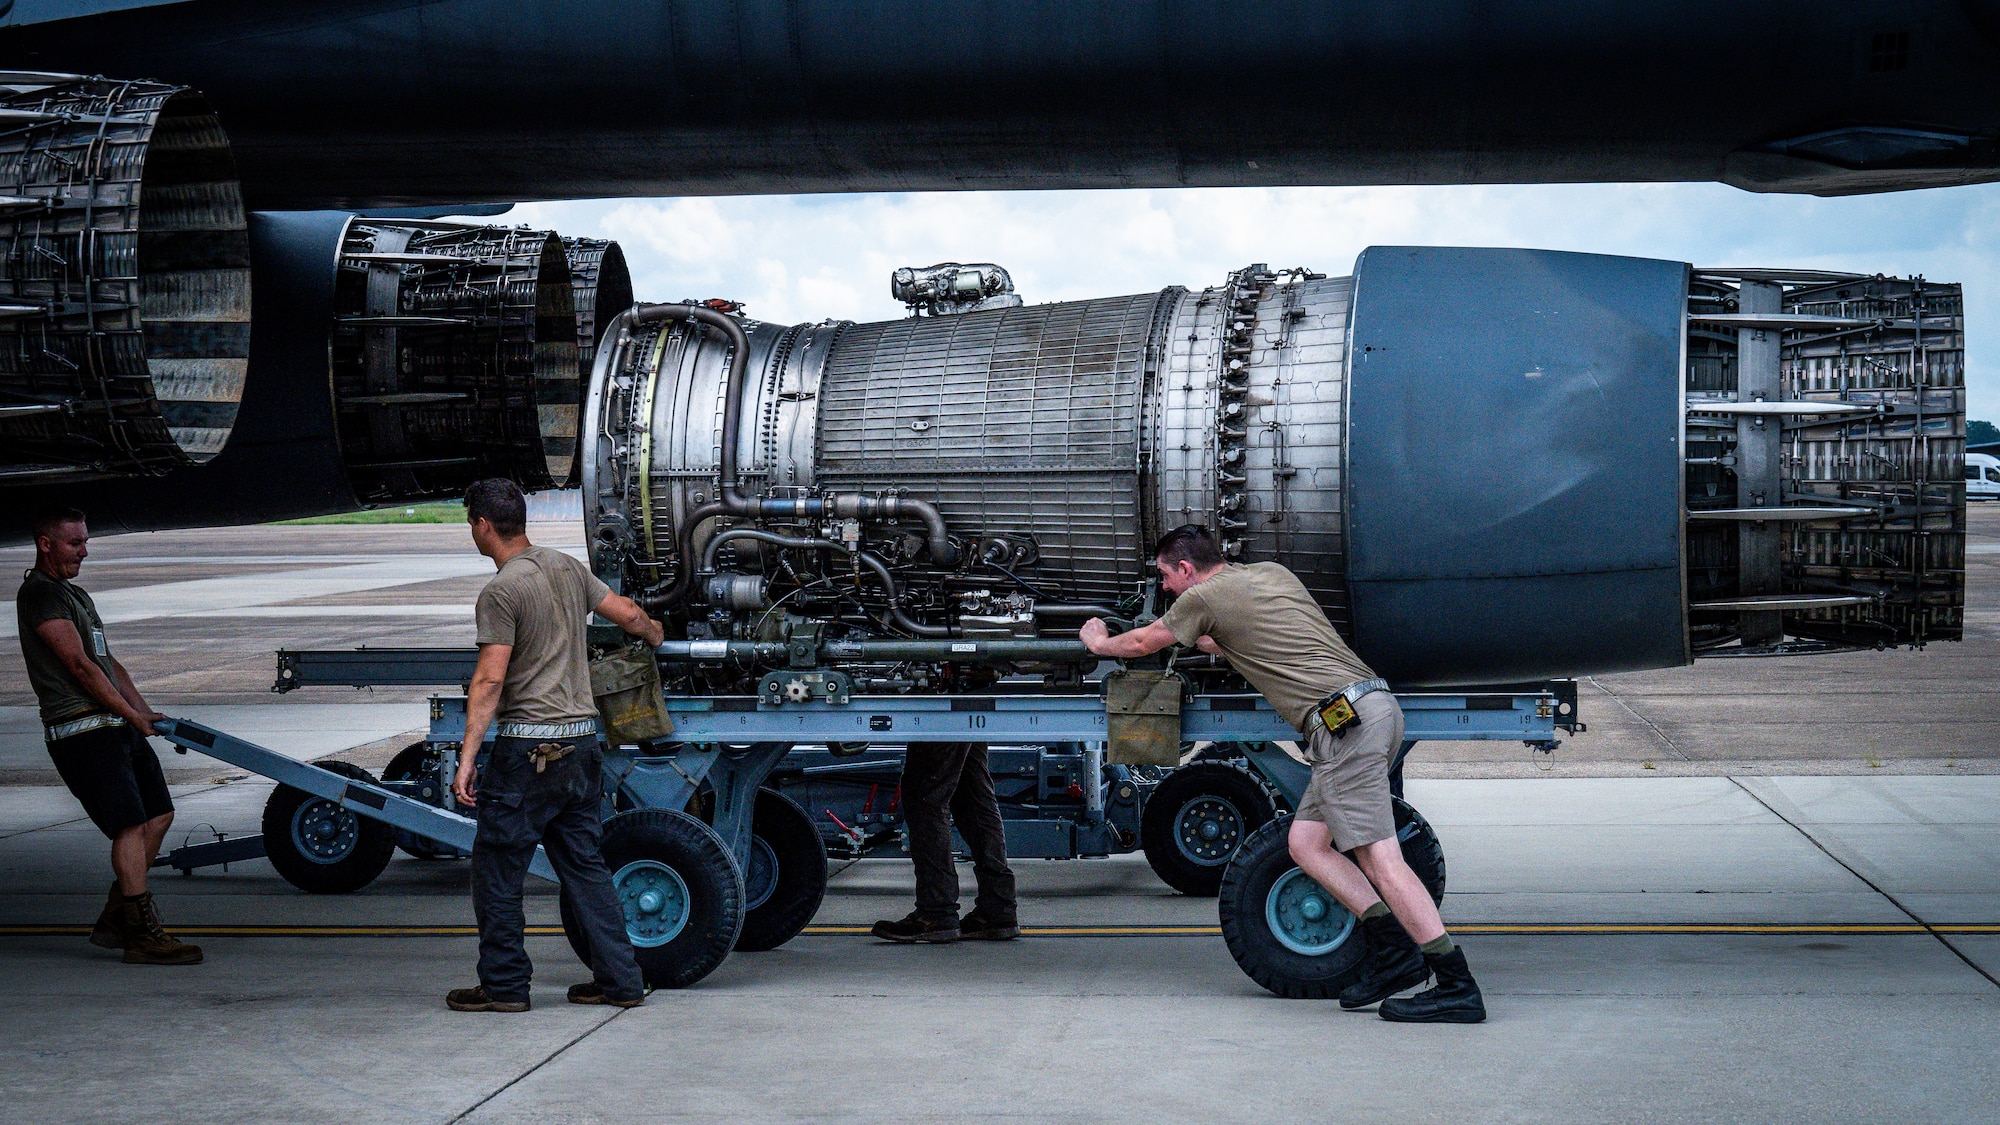 Airmen from Dyess Air Force Base, Texas, remove a F-101 engine from a B-1B Lancer at Barksdale Air Force Base, Louisiana, July 7, 2021.